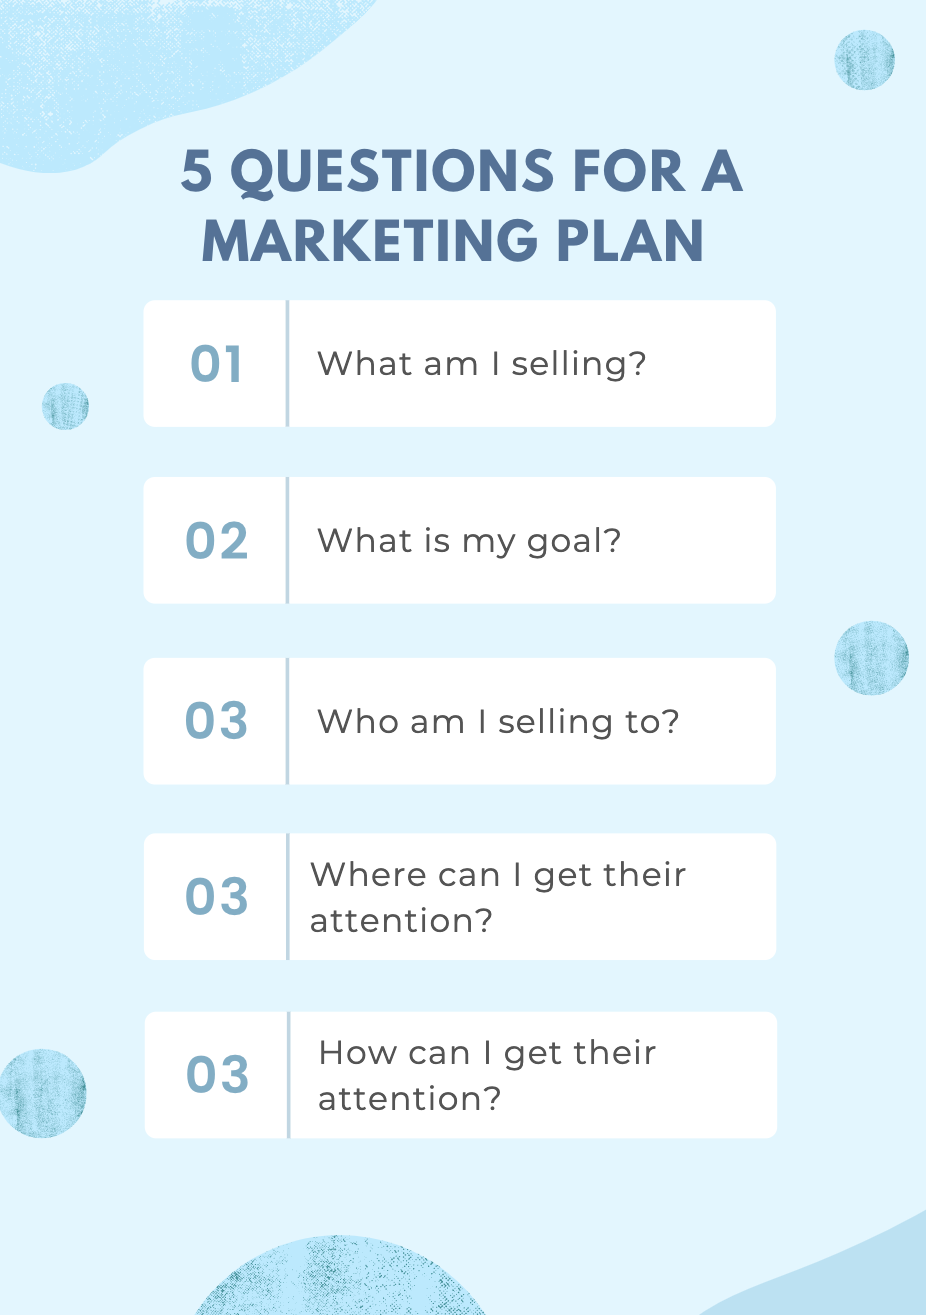 5 questions for a simple marketing plan